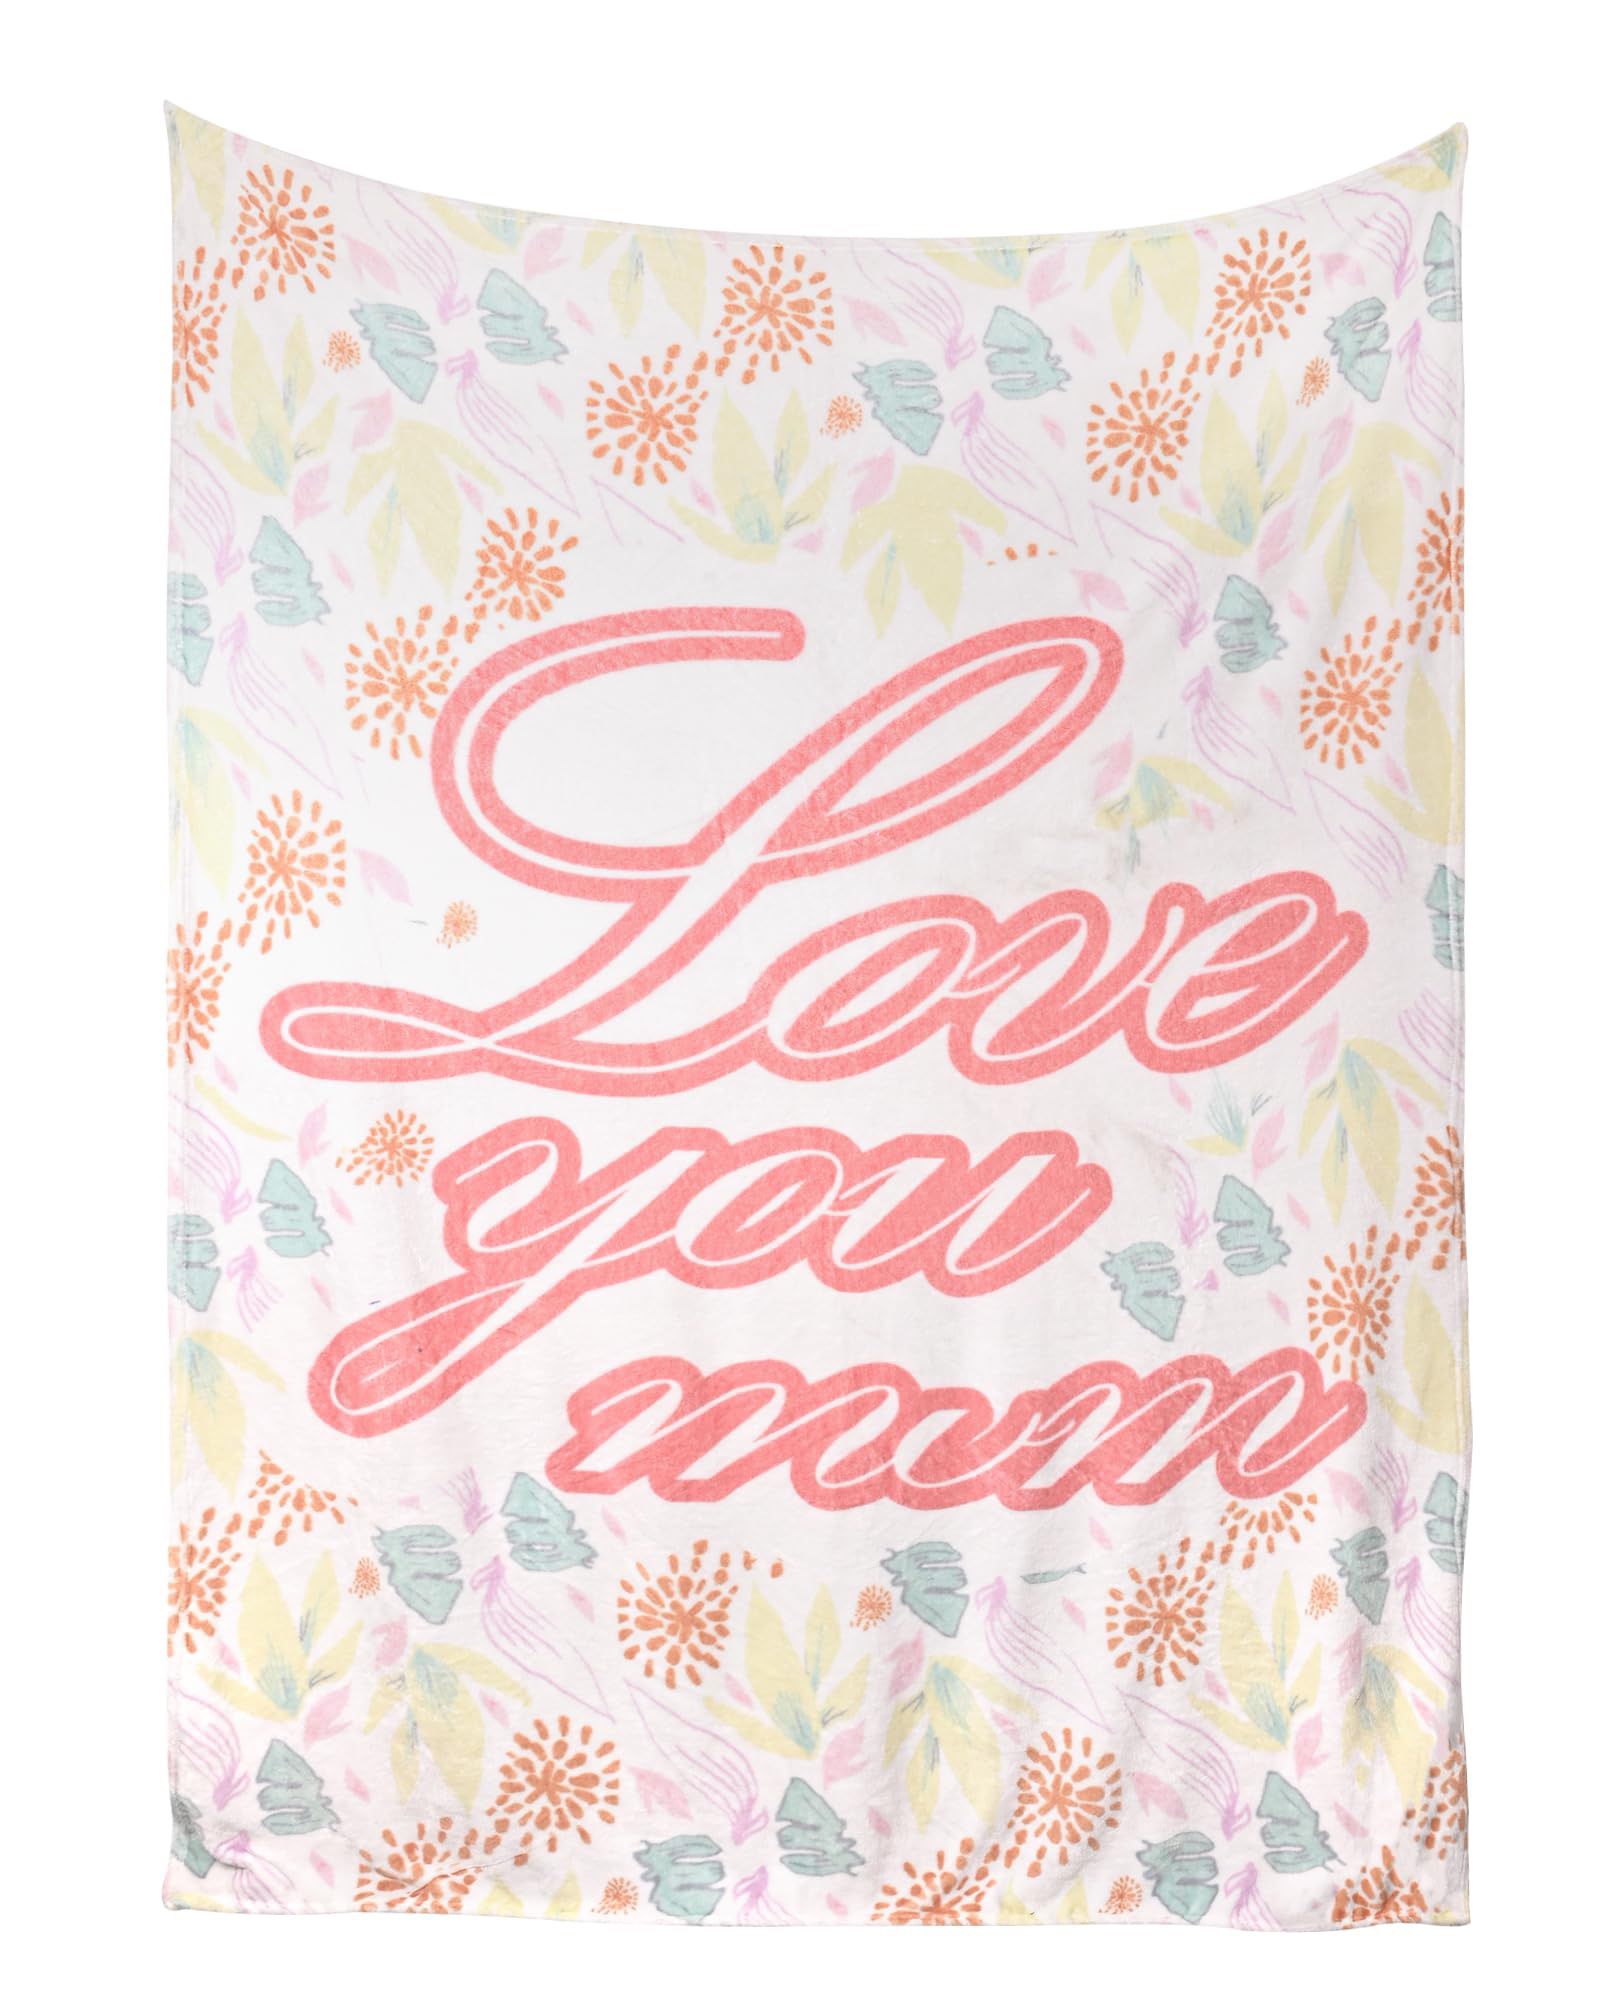 DN DECONATION Mothers Day Blanket From Son, Soft Love You Mom Blanket With Colorful Flowers, For Mom 78 X 59 Inches Love You Mum 78.74"X59.05"